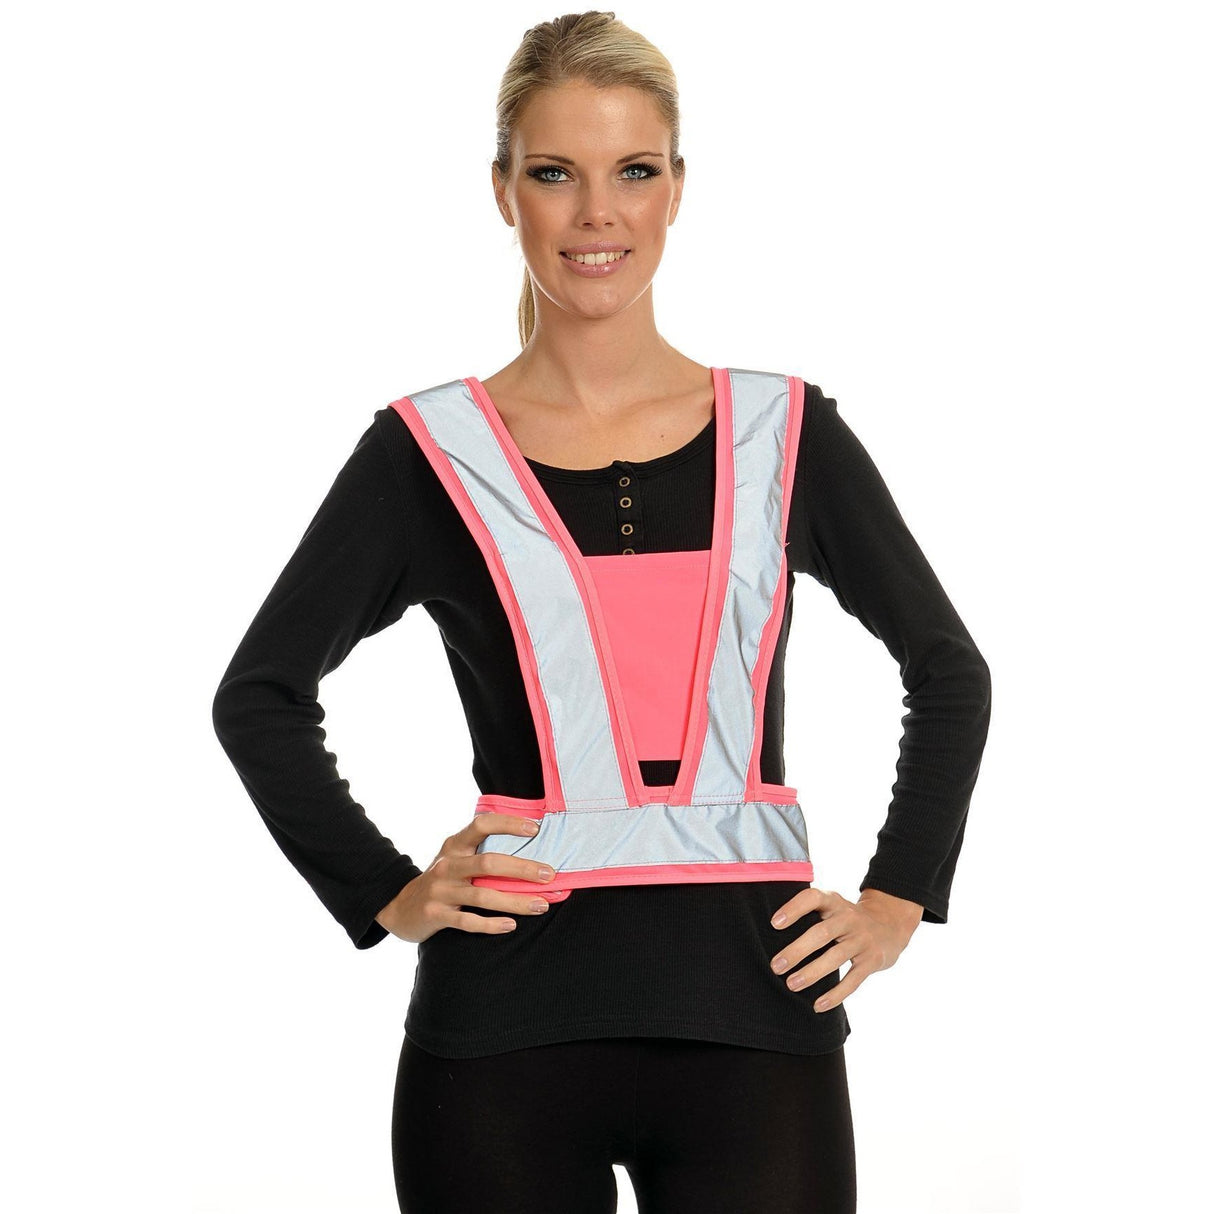 Equisafety Body Harness Child